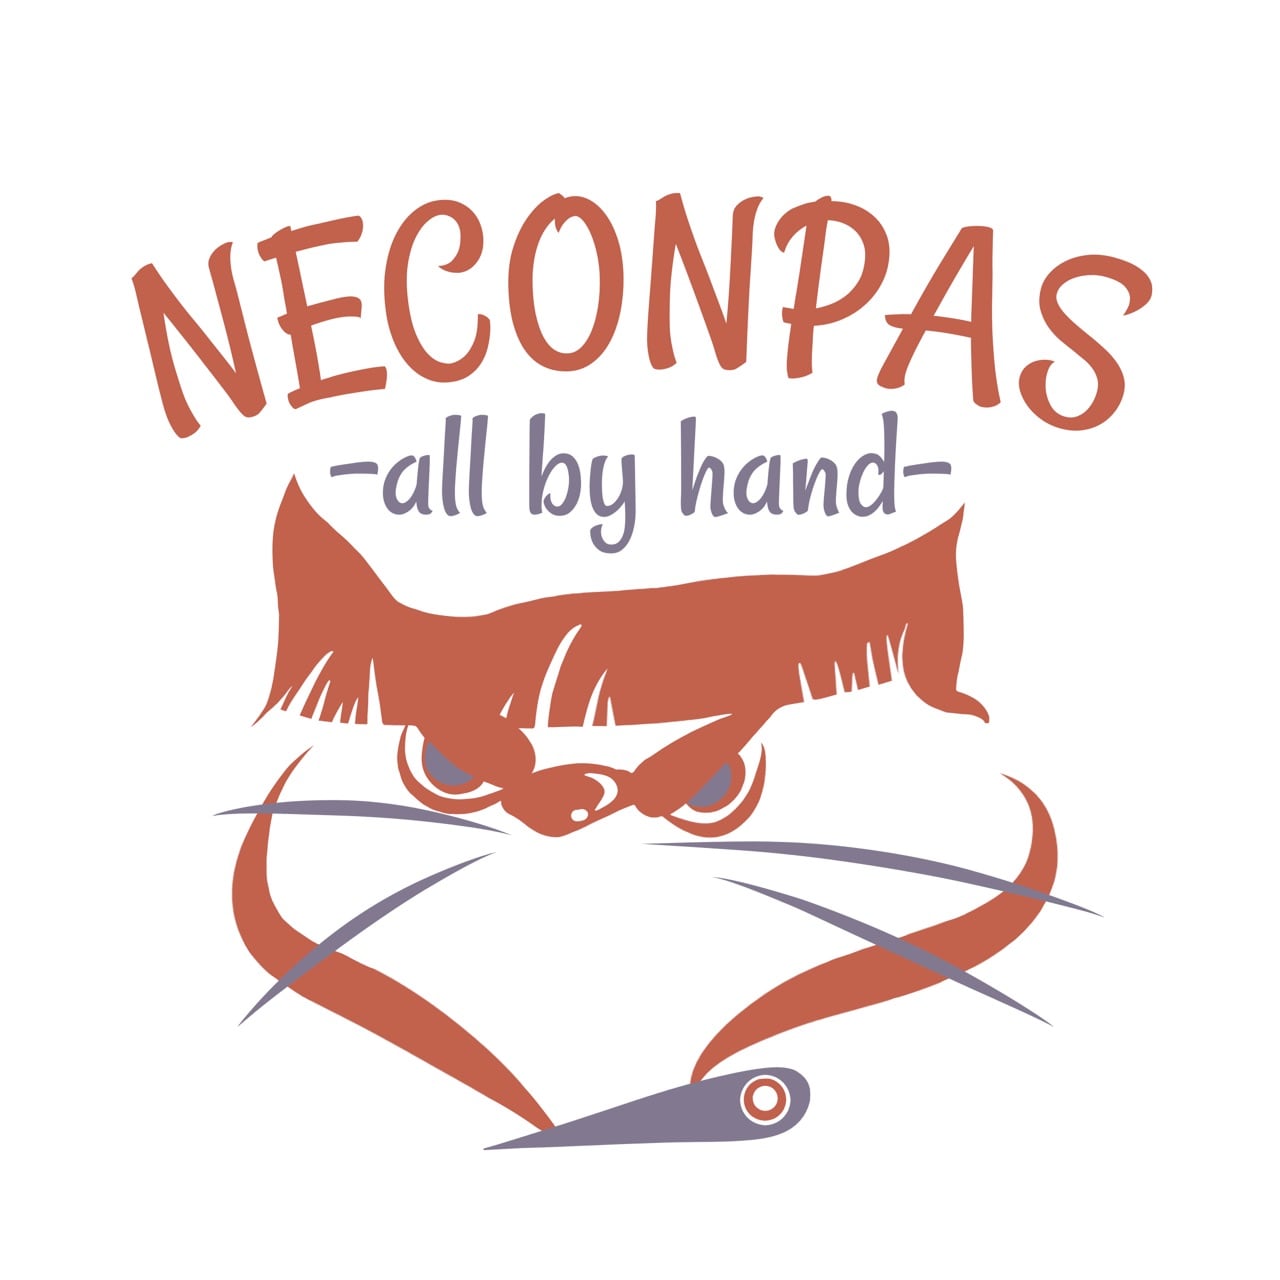 NECONPAS -all by hand-